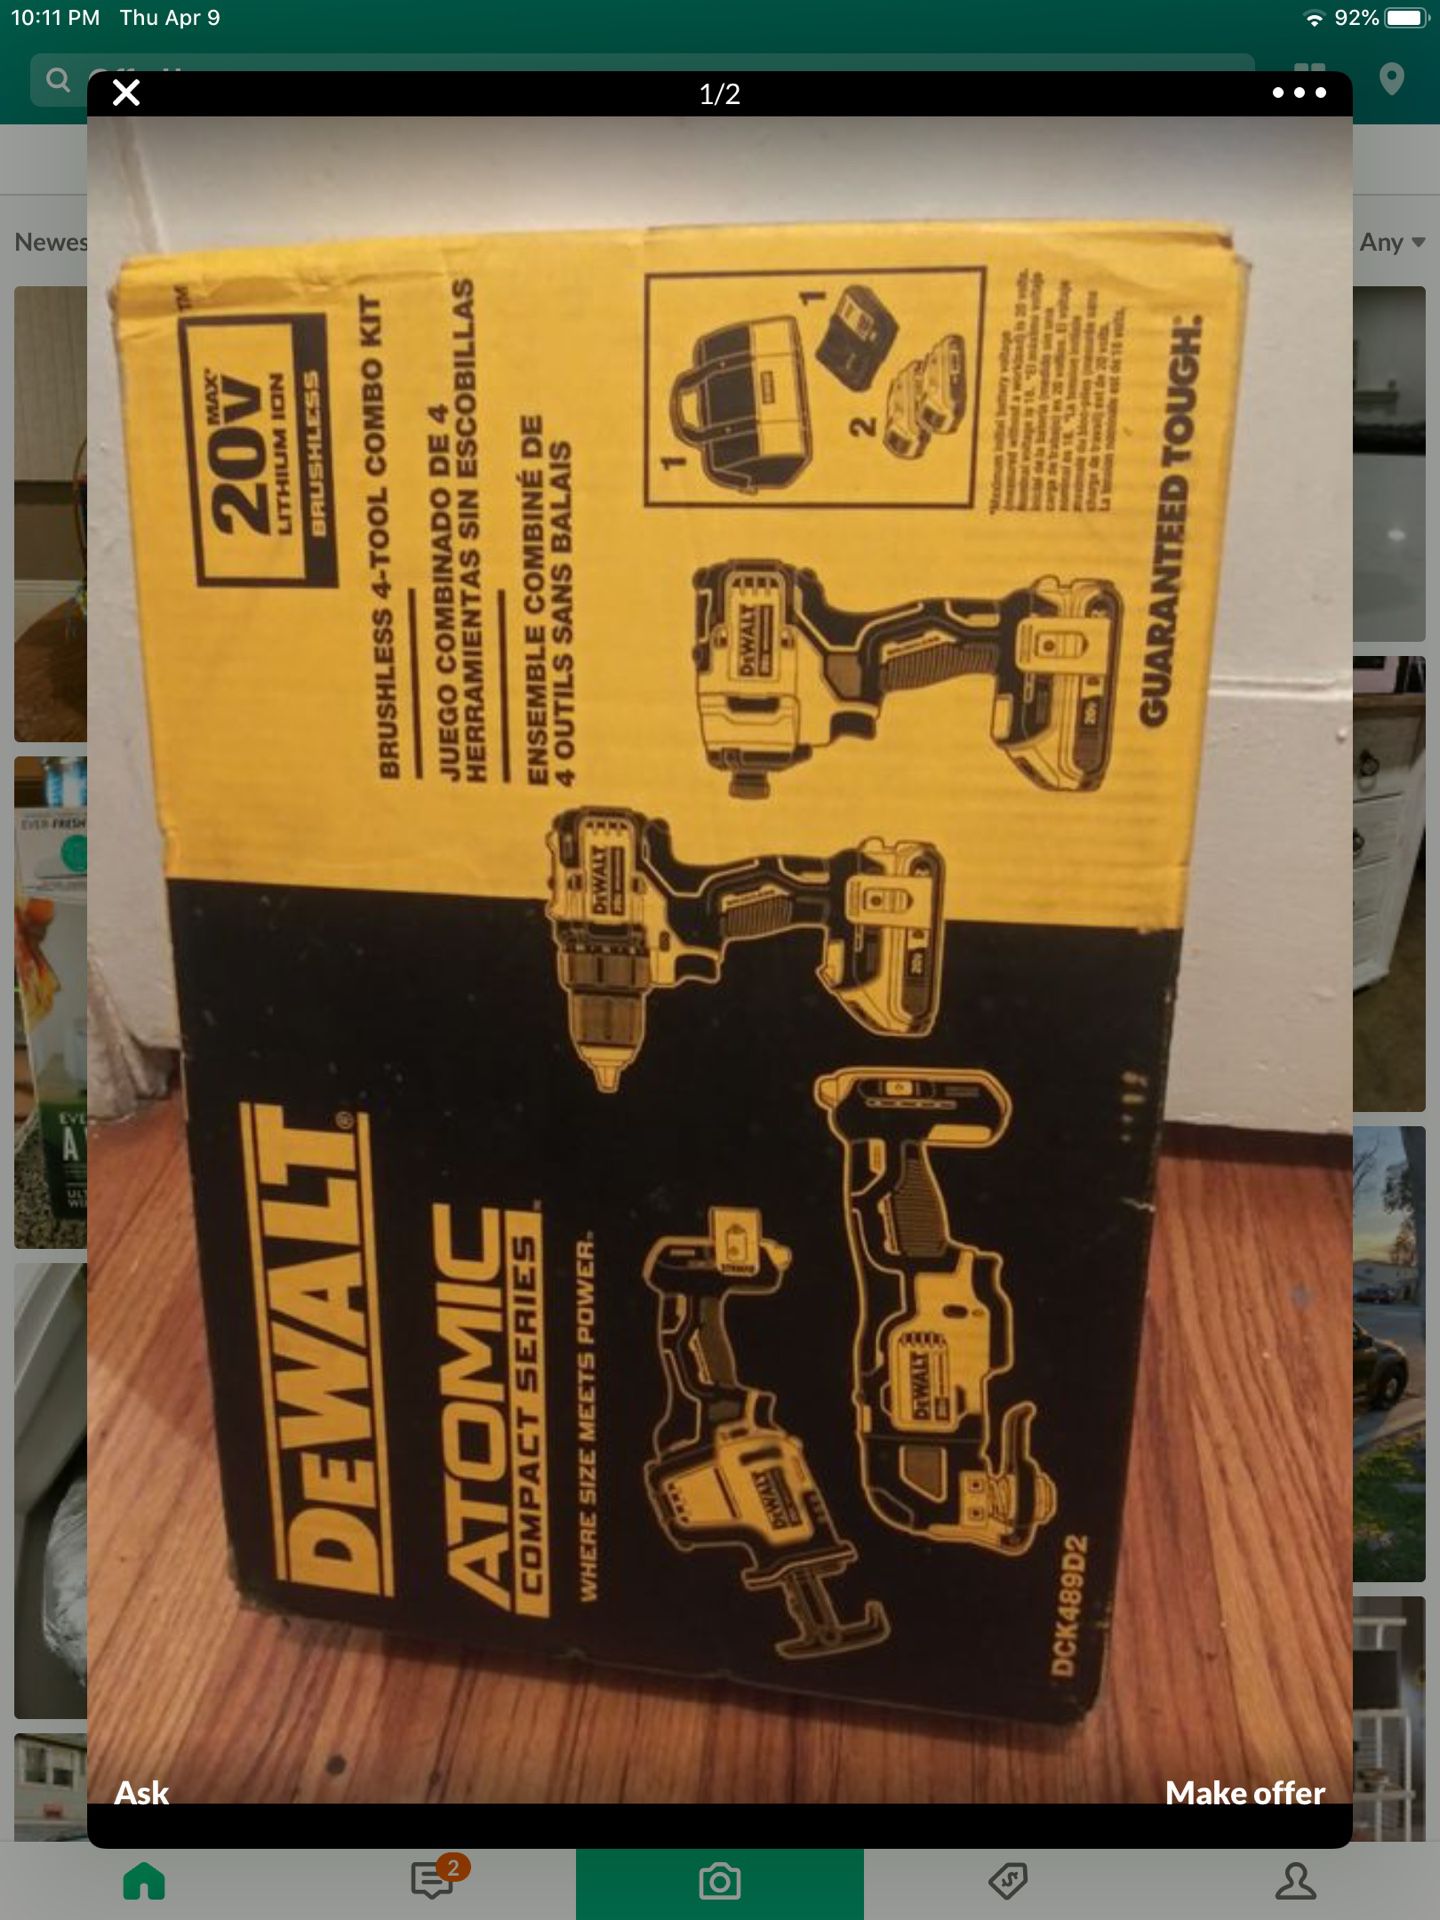 Dewalt atomic compact series 4 tools 2 saws 2 drills 2 batteries charger and bag